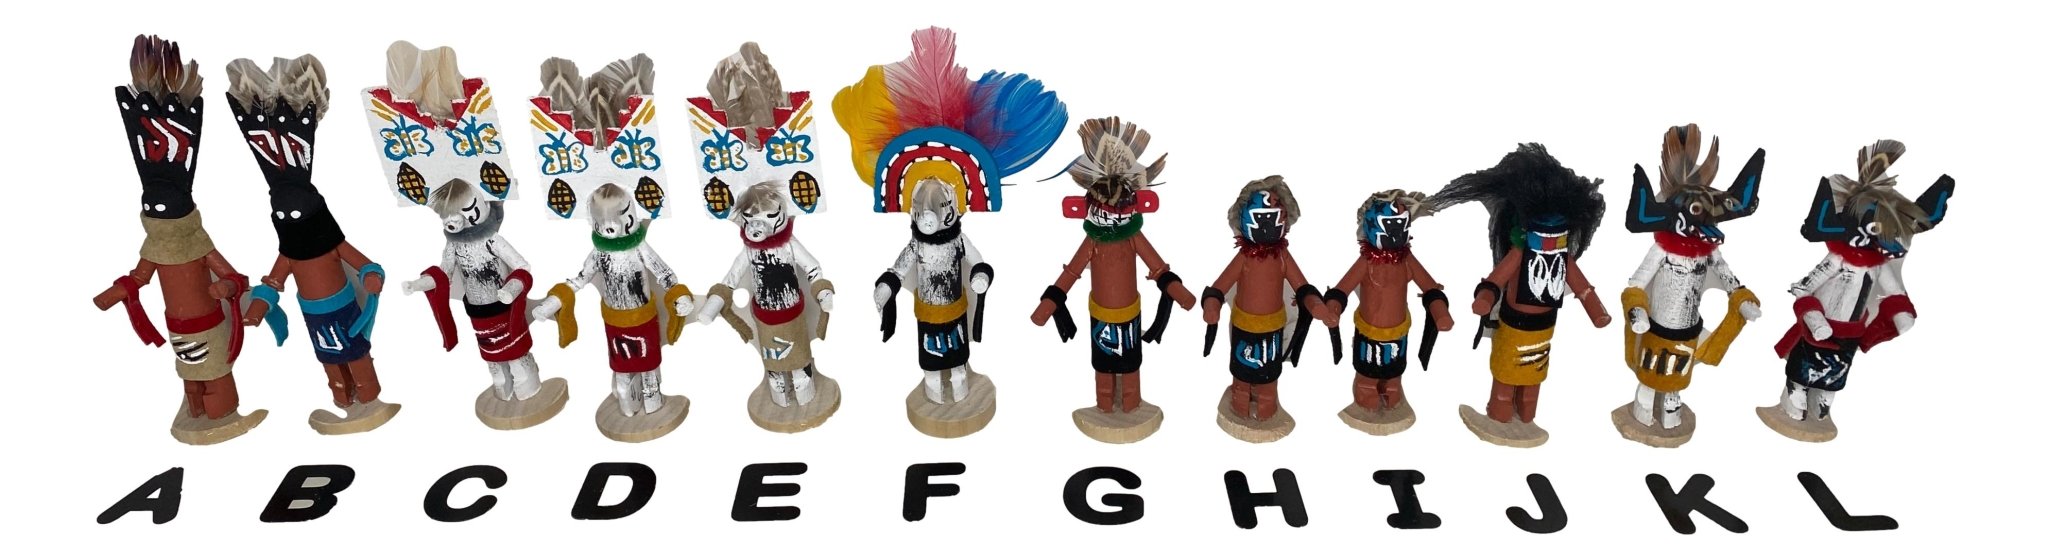 Art Carved Wood Hopi Kachina Dolls Handcrafted by Native American Artisan 2 L x 1 W x 4 L Inches - Ysleta Mission Gift Shop- VOTED 2022 El Paso's Best Gift Shop